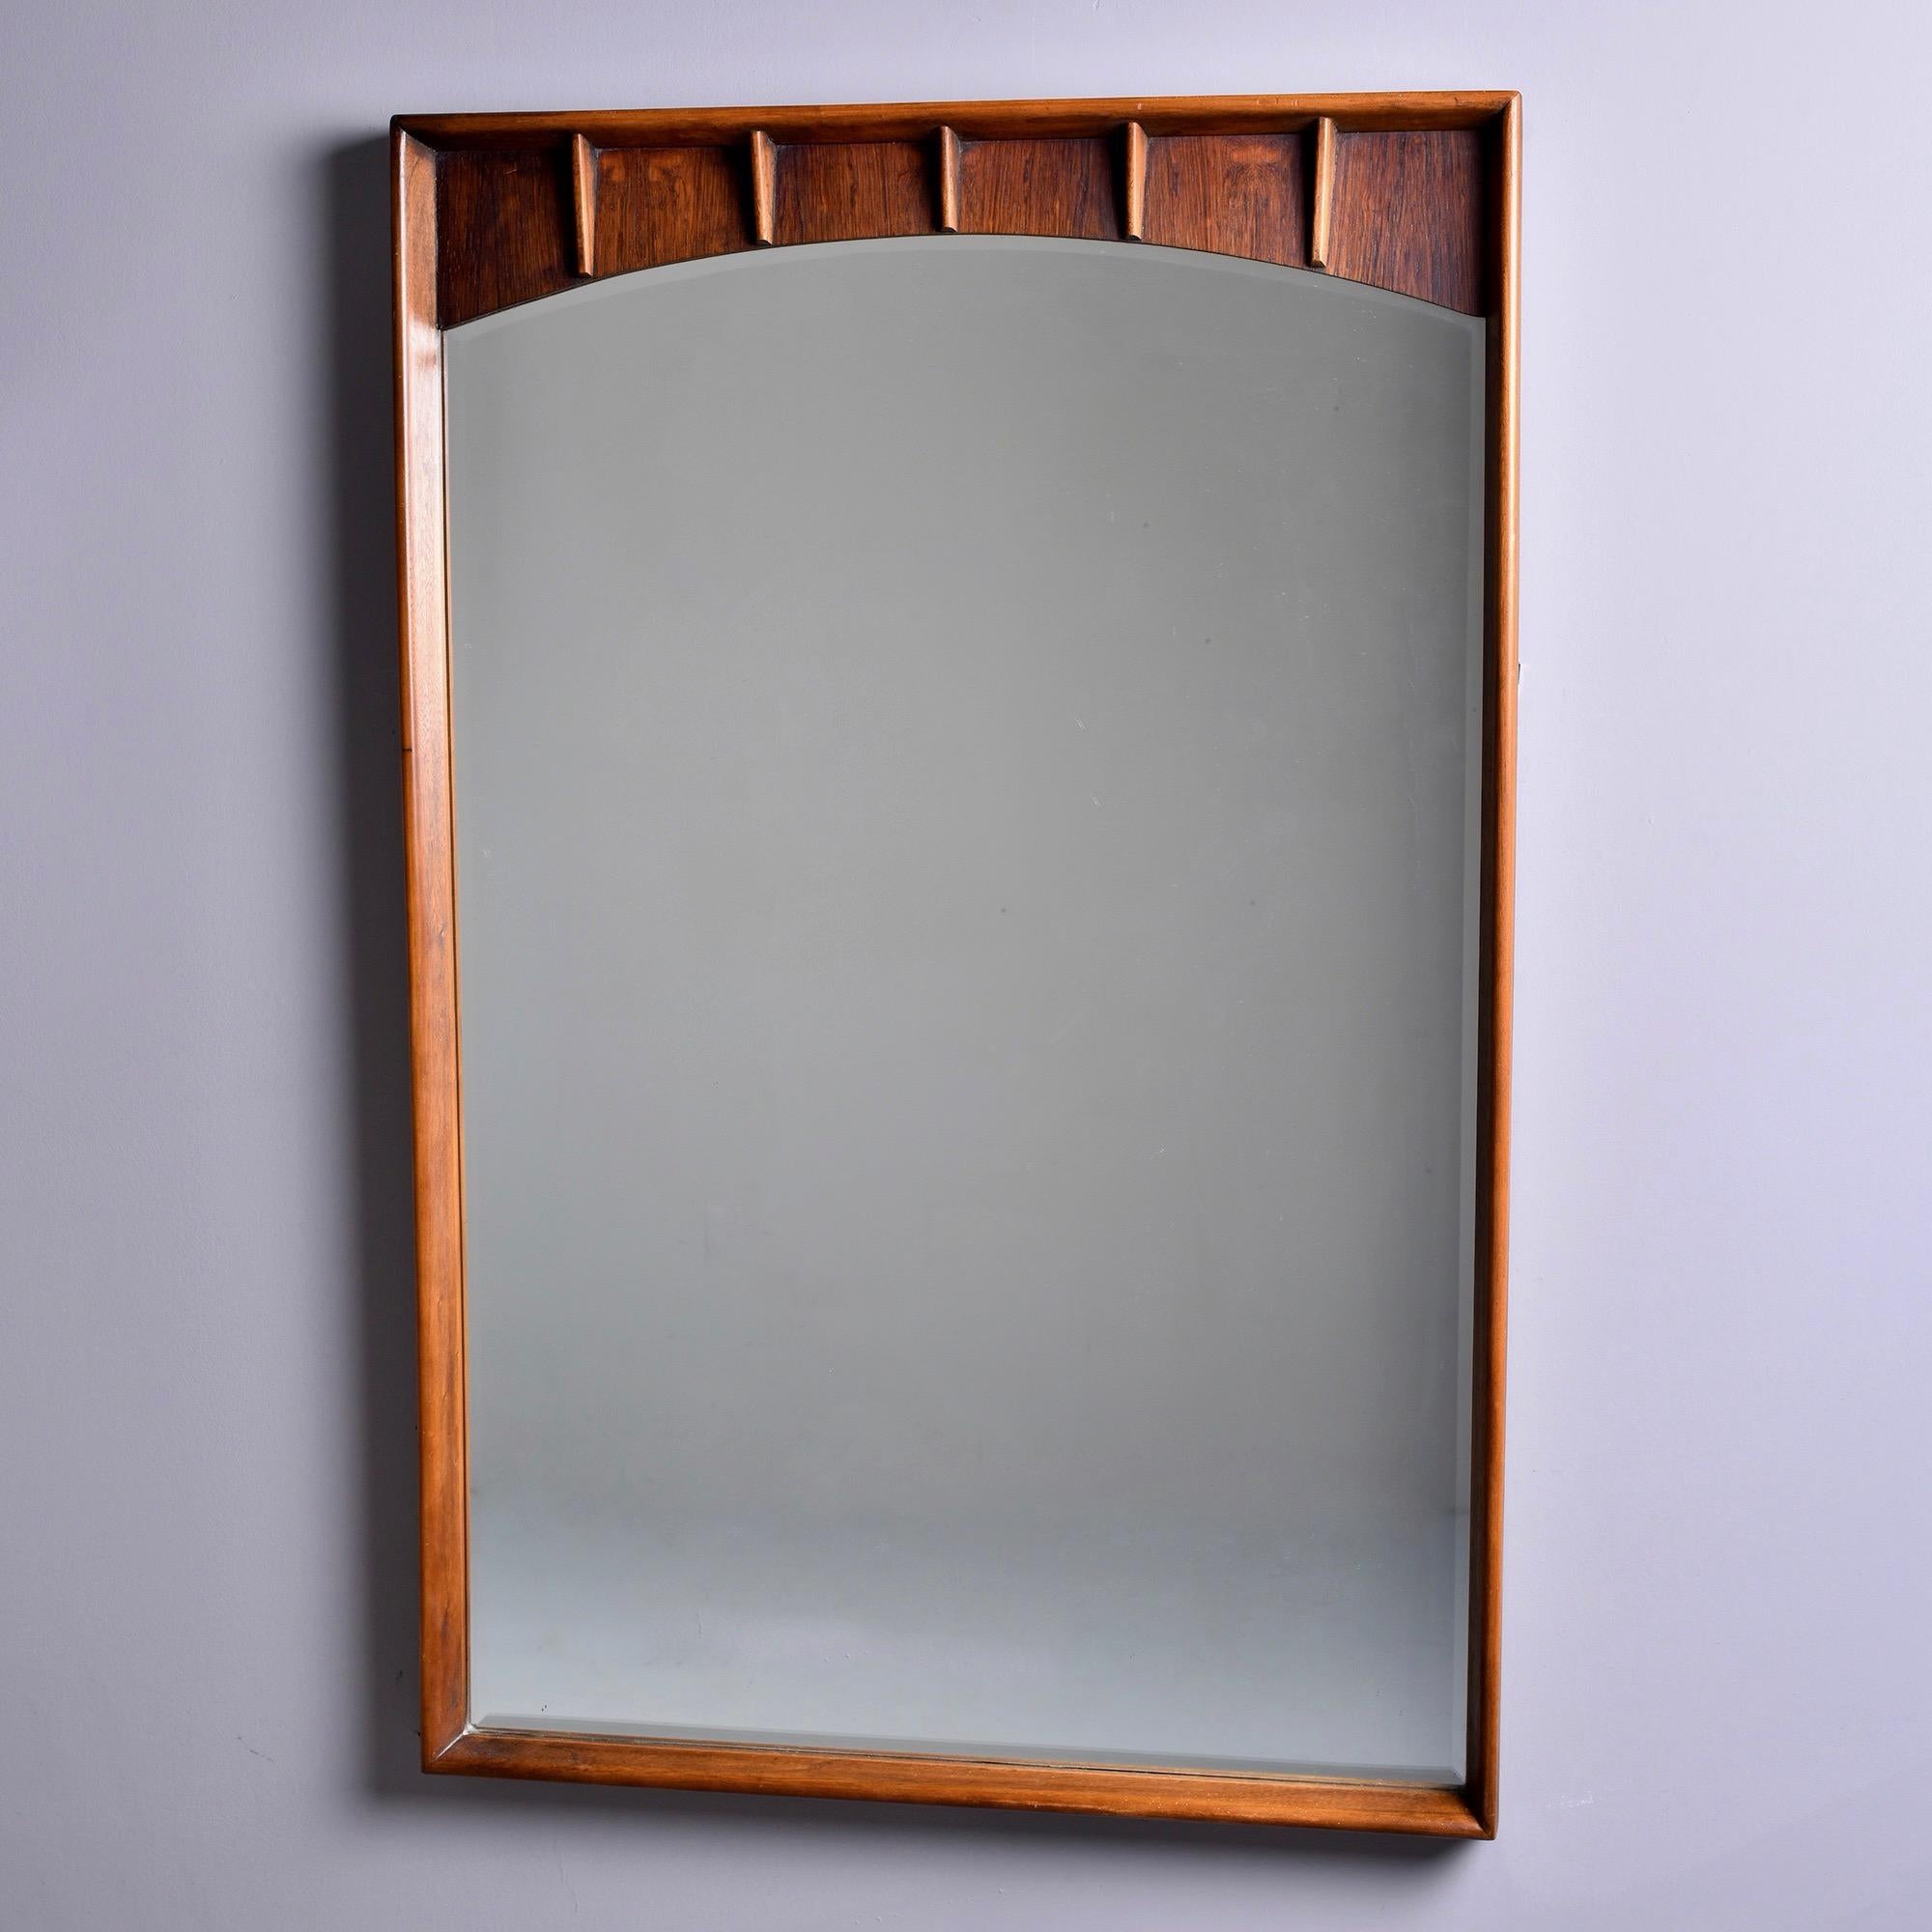 Circa 1960s mirror has a subtle top arch and deep set walnut and pecan frame with narrow, ribbed accents at the top. Mirror’s edges are beveled. Found in the US. Unknown maker.